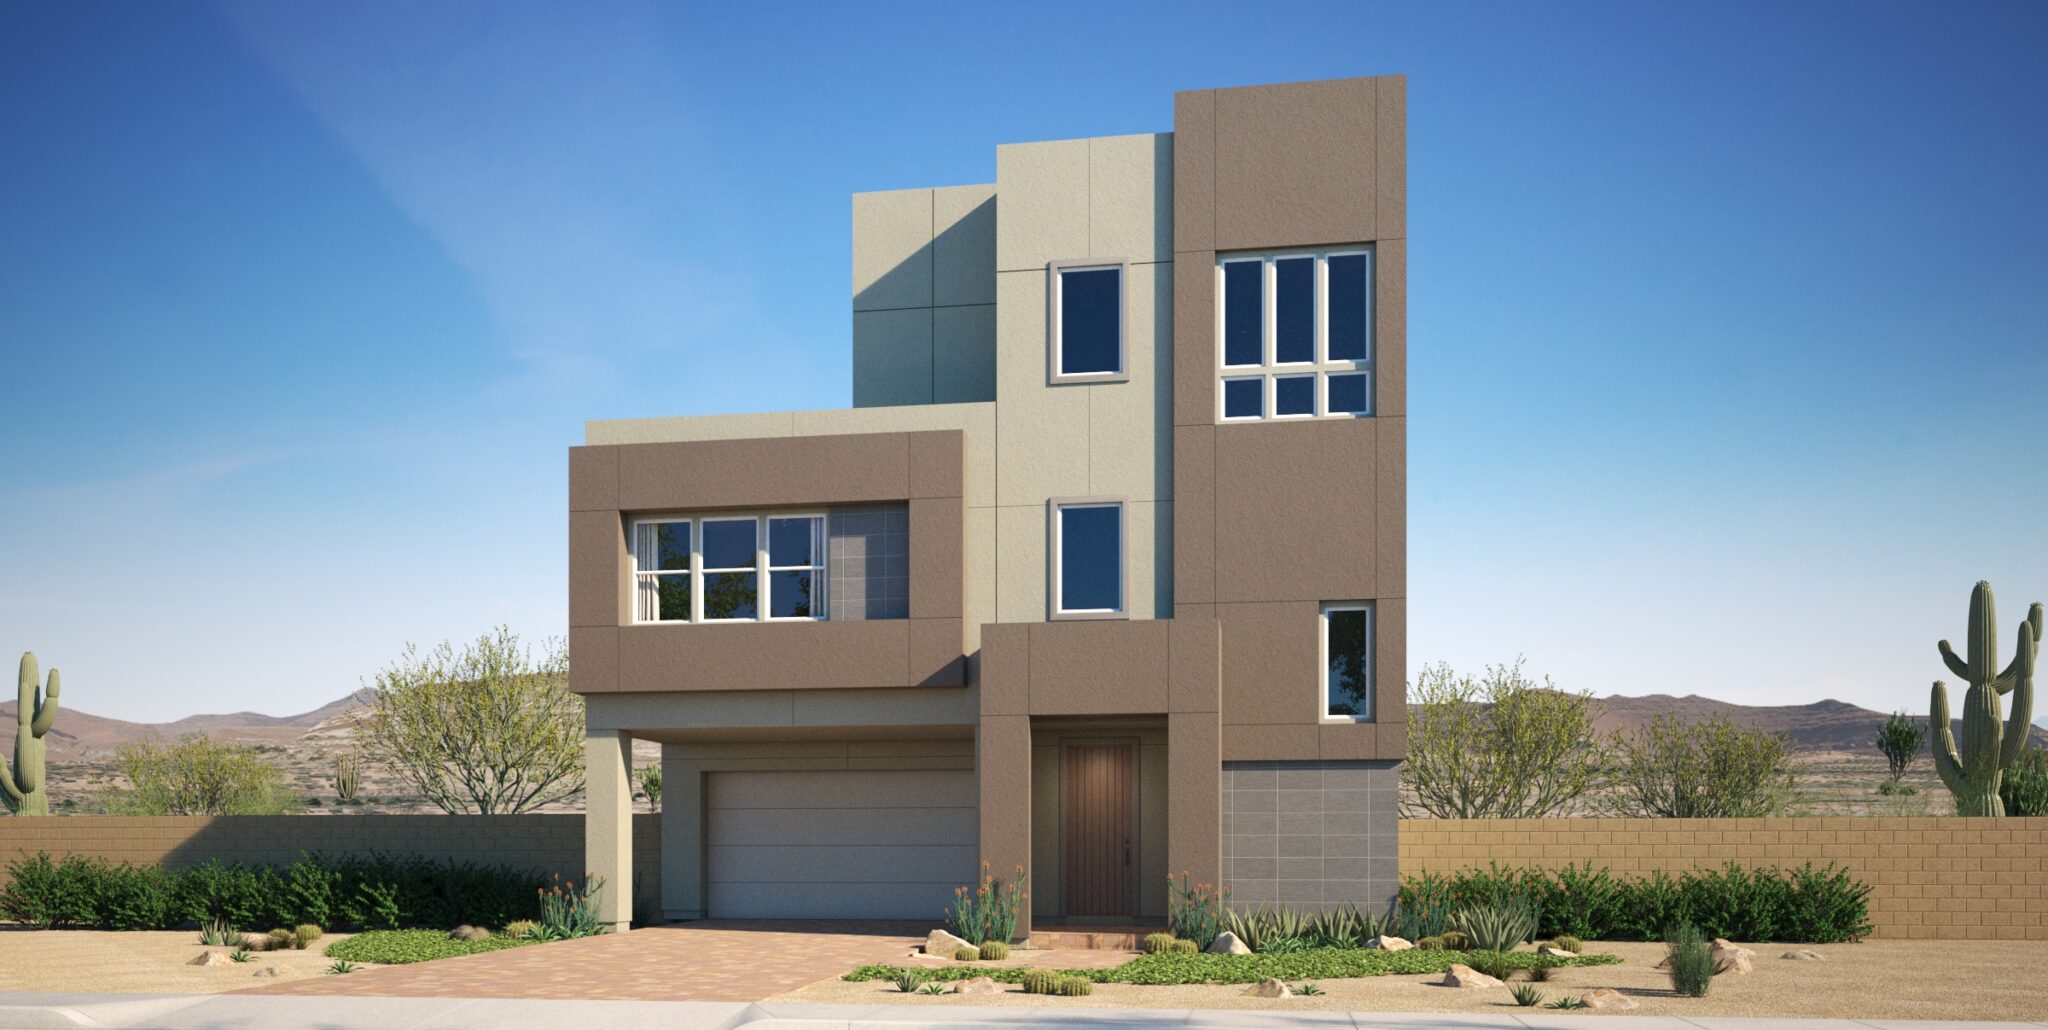 Elevation C of Acacia Plan 3 at Vireo by Woodside Homes